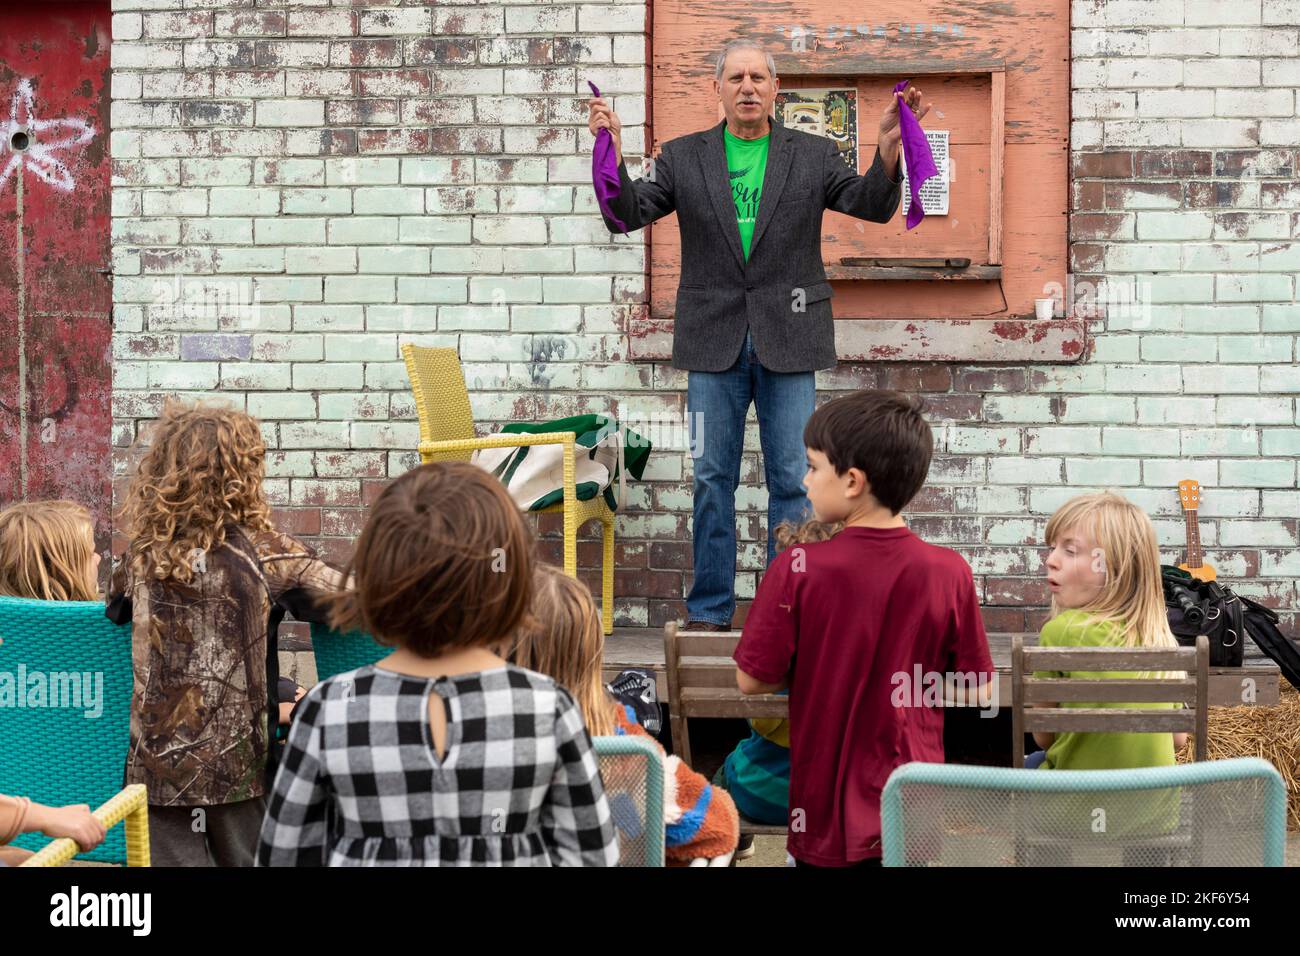 Detroit, Michigan - Tom Fentin performs magic tricks during a talent show at a fall festival on the near east side of Detroit. Stock Photo